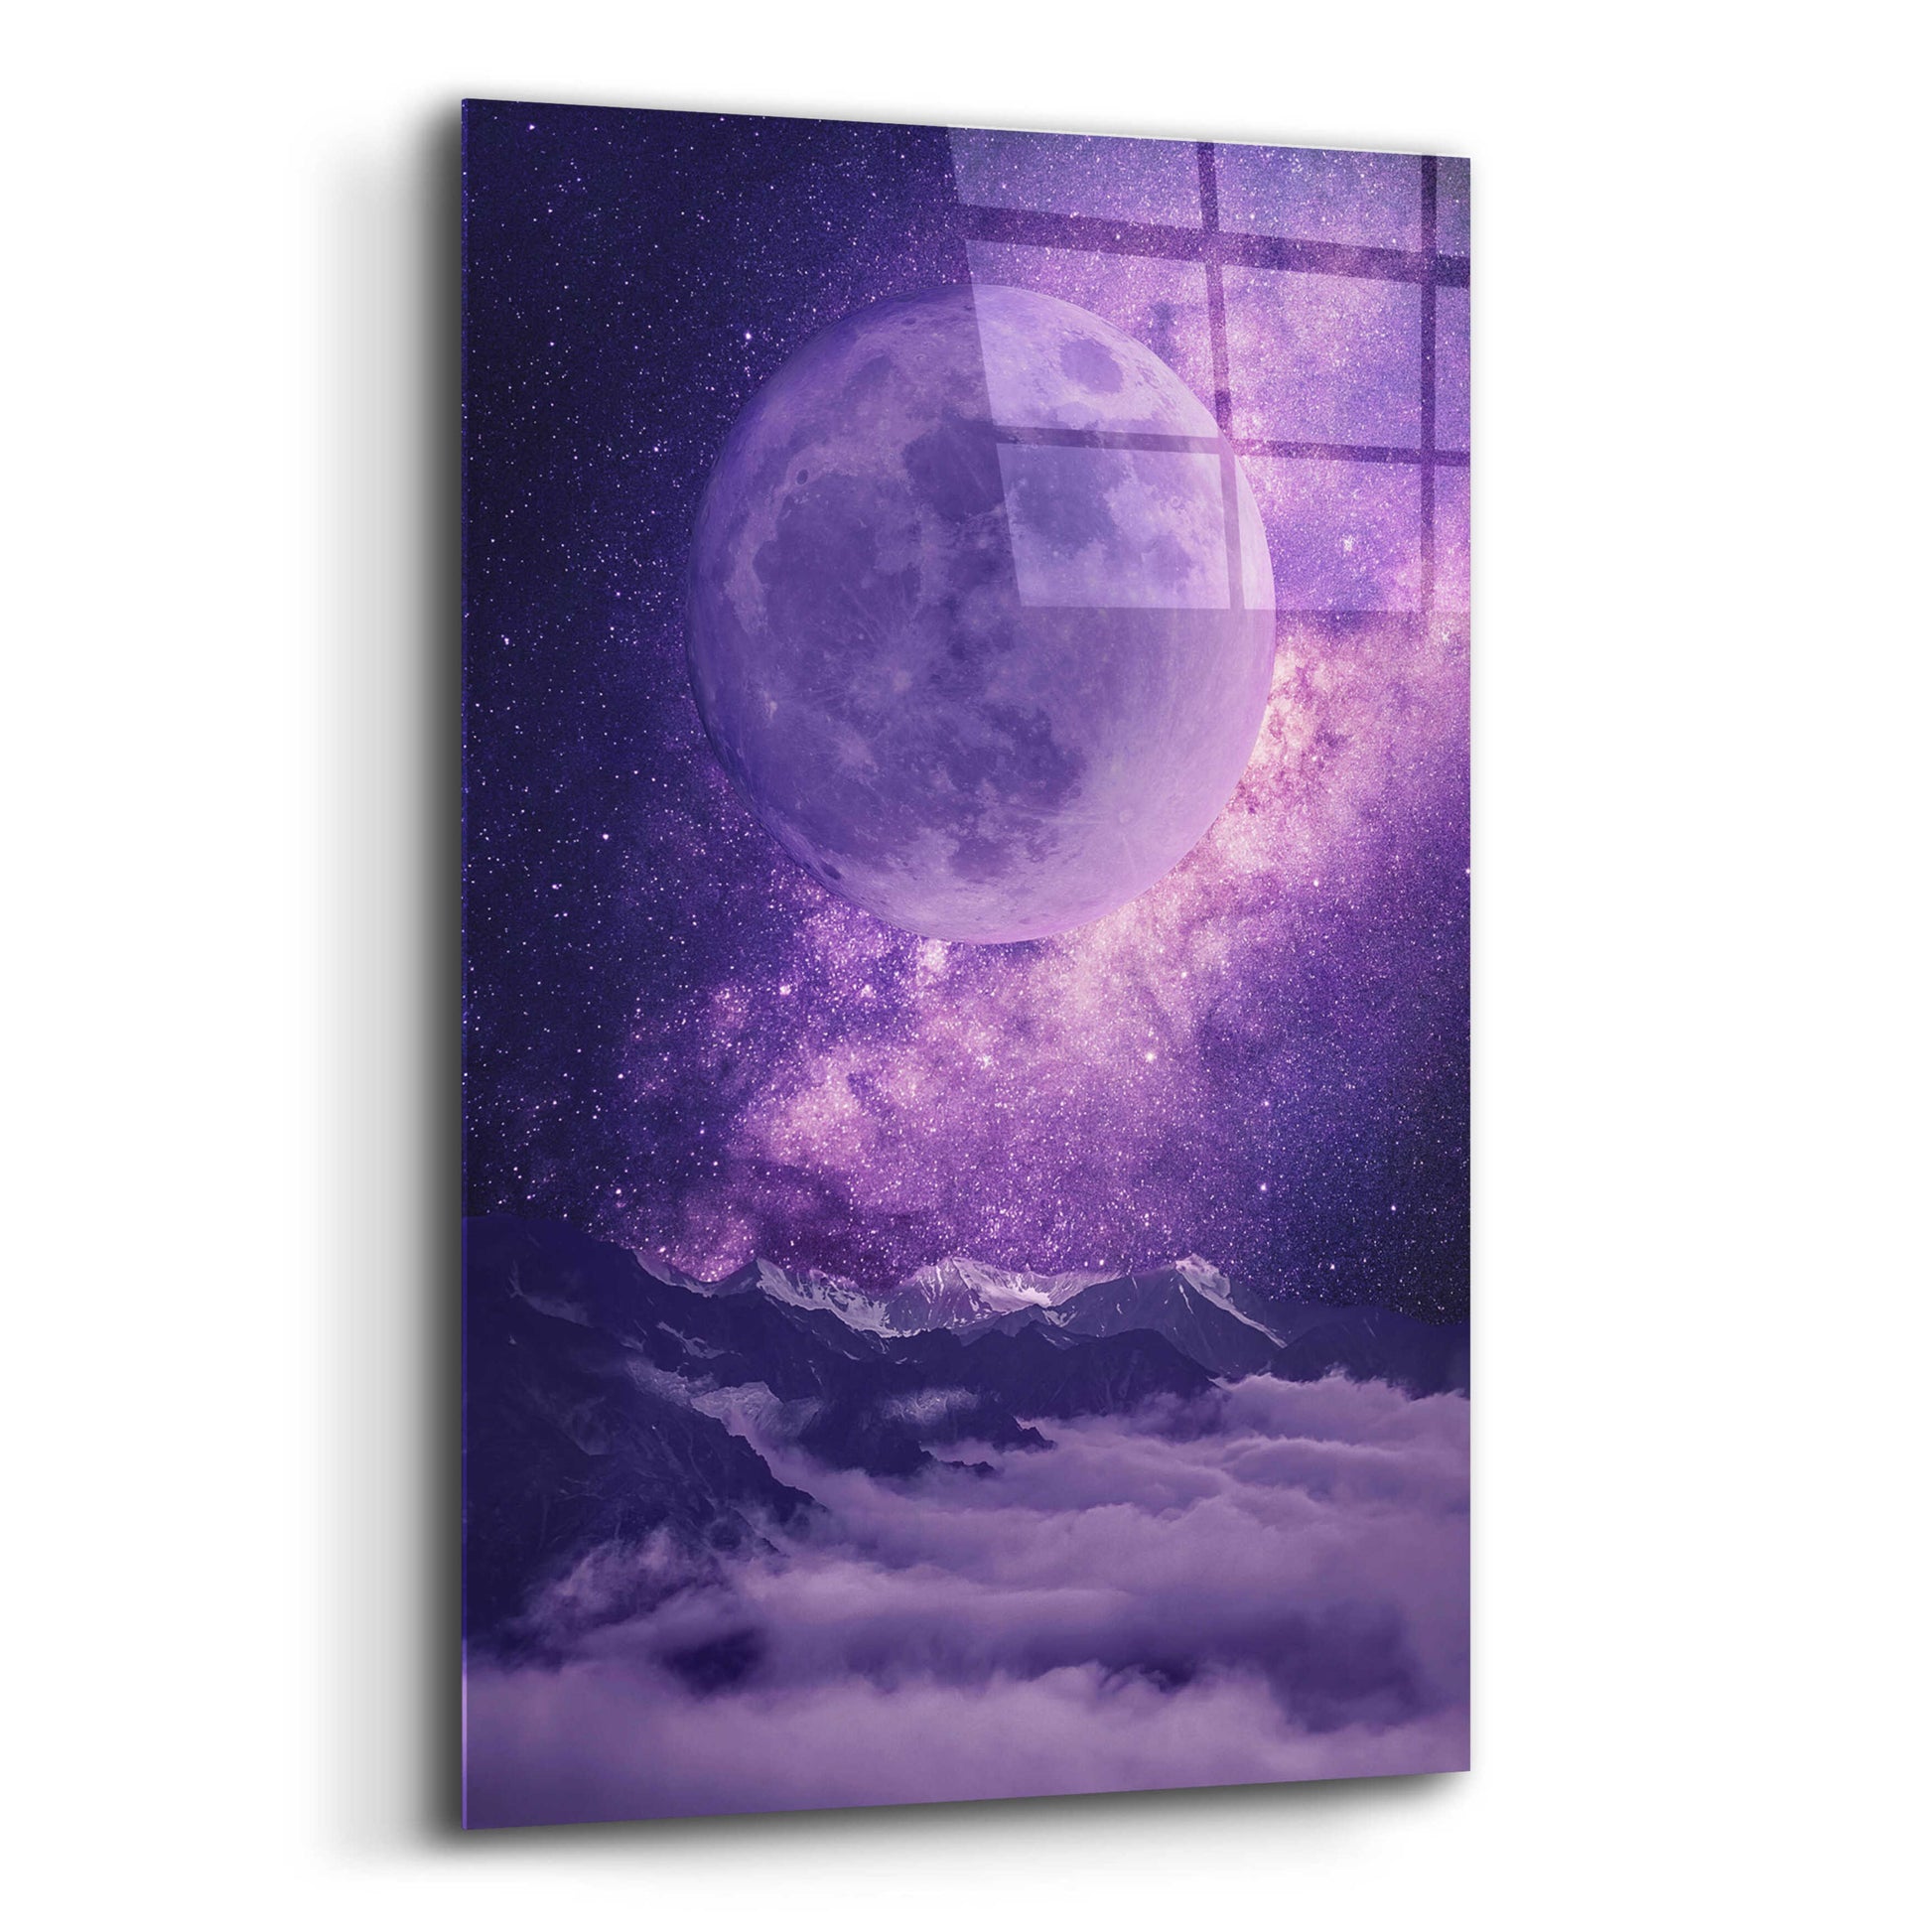 Epic Art 'Sublime Moonlight ' by Unknown Artist, Acrylic Glass Wall Art,12x16